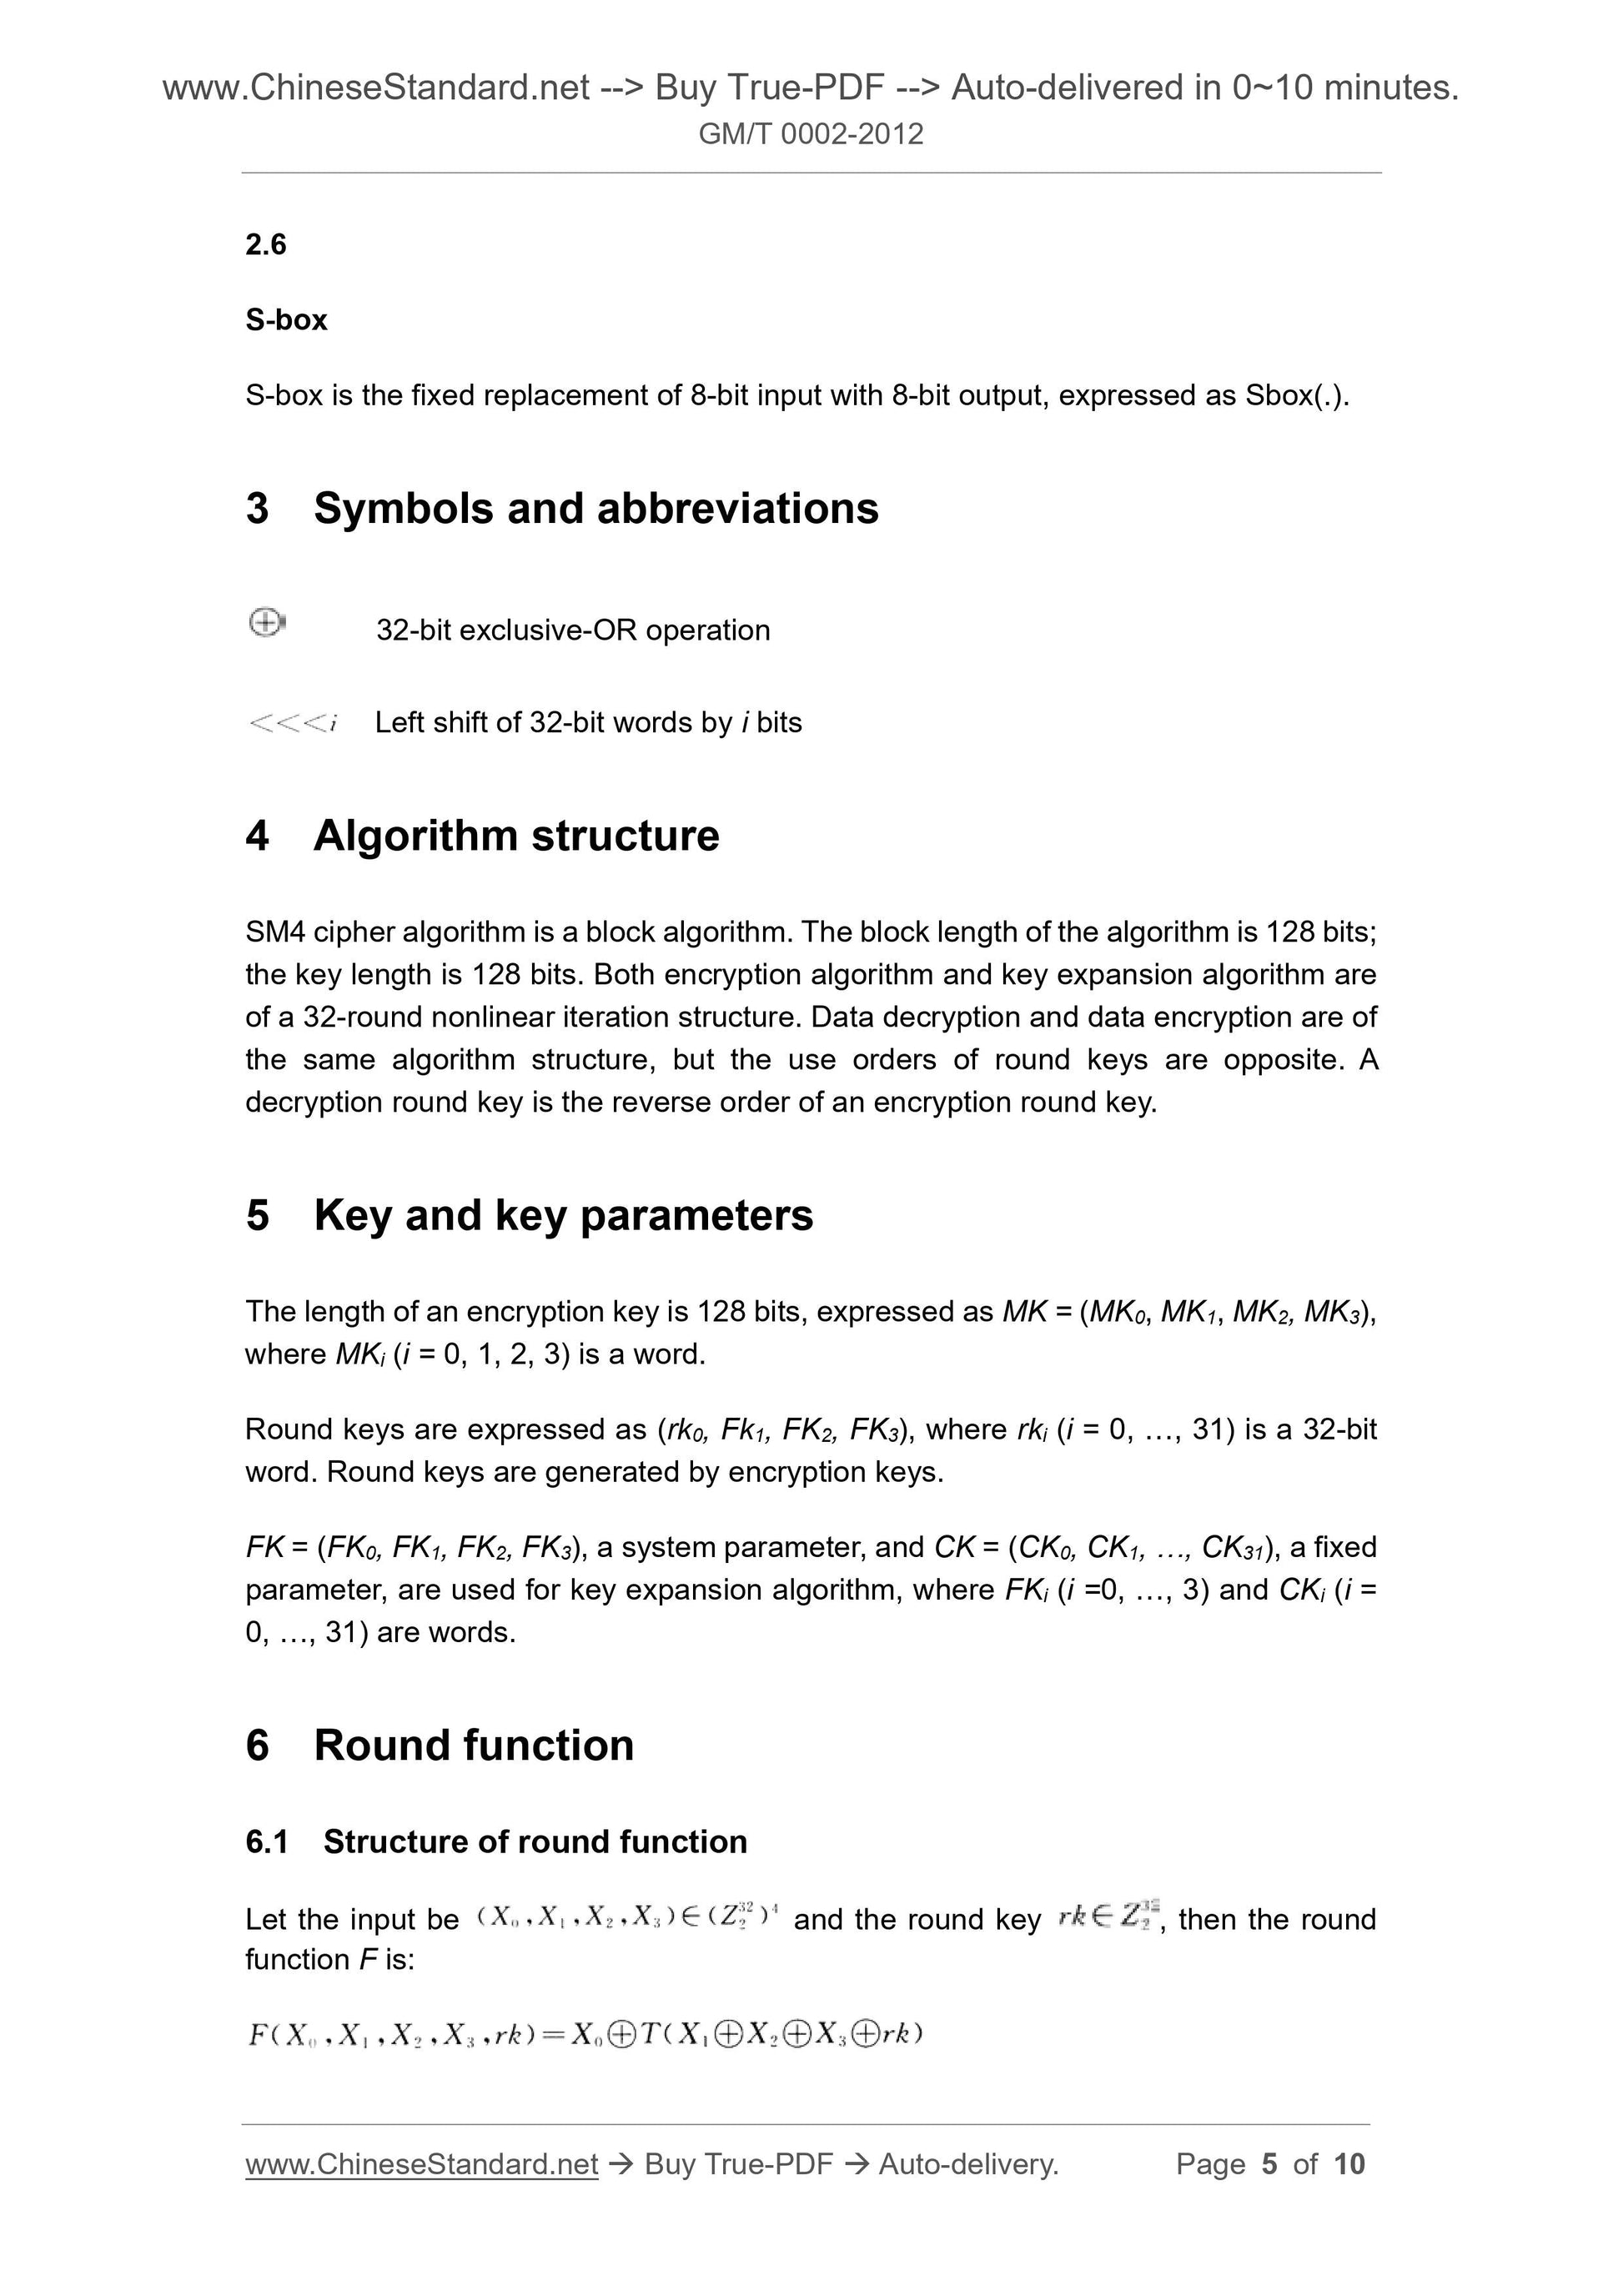 GM/T 0002-2012 Page 4